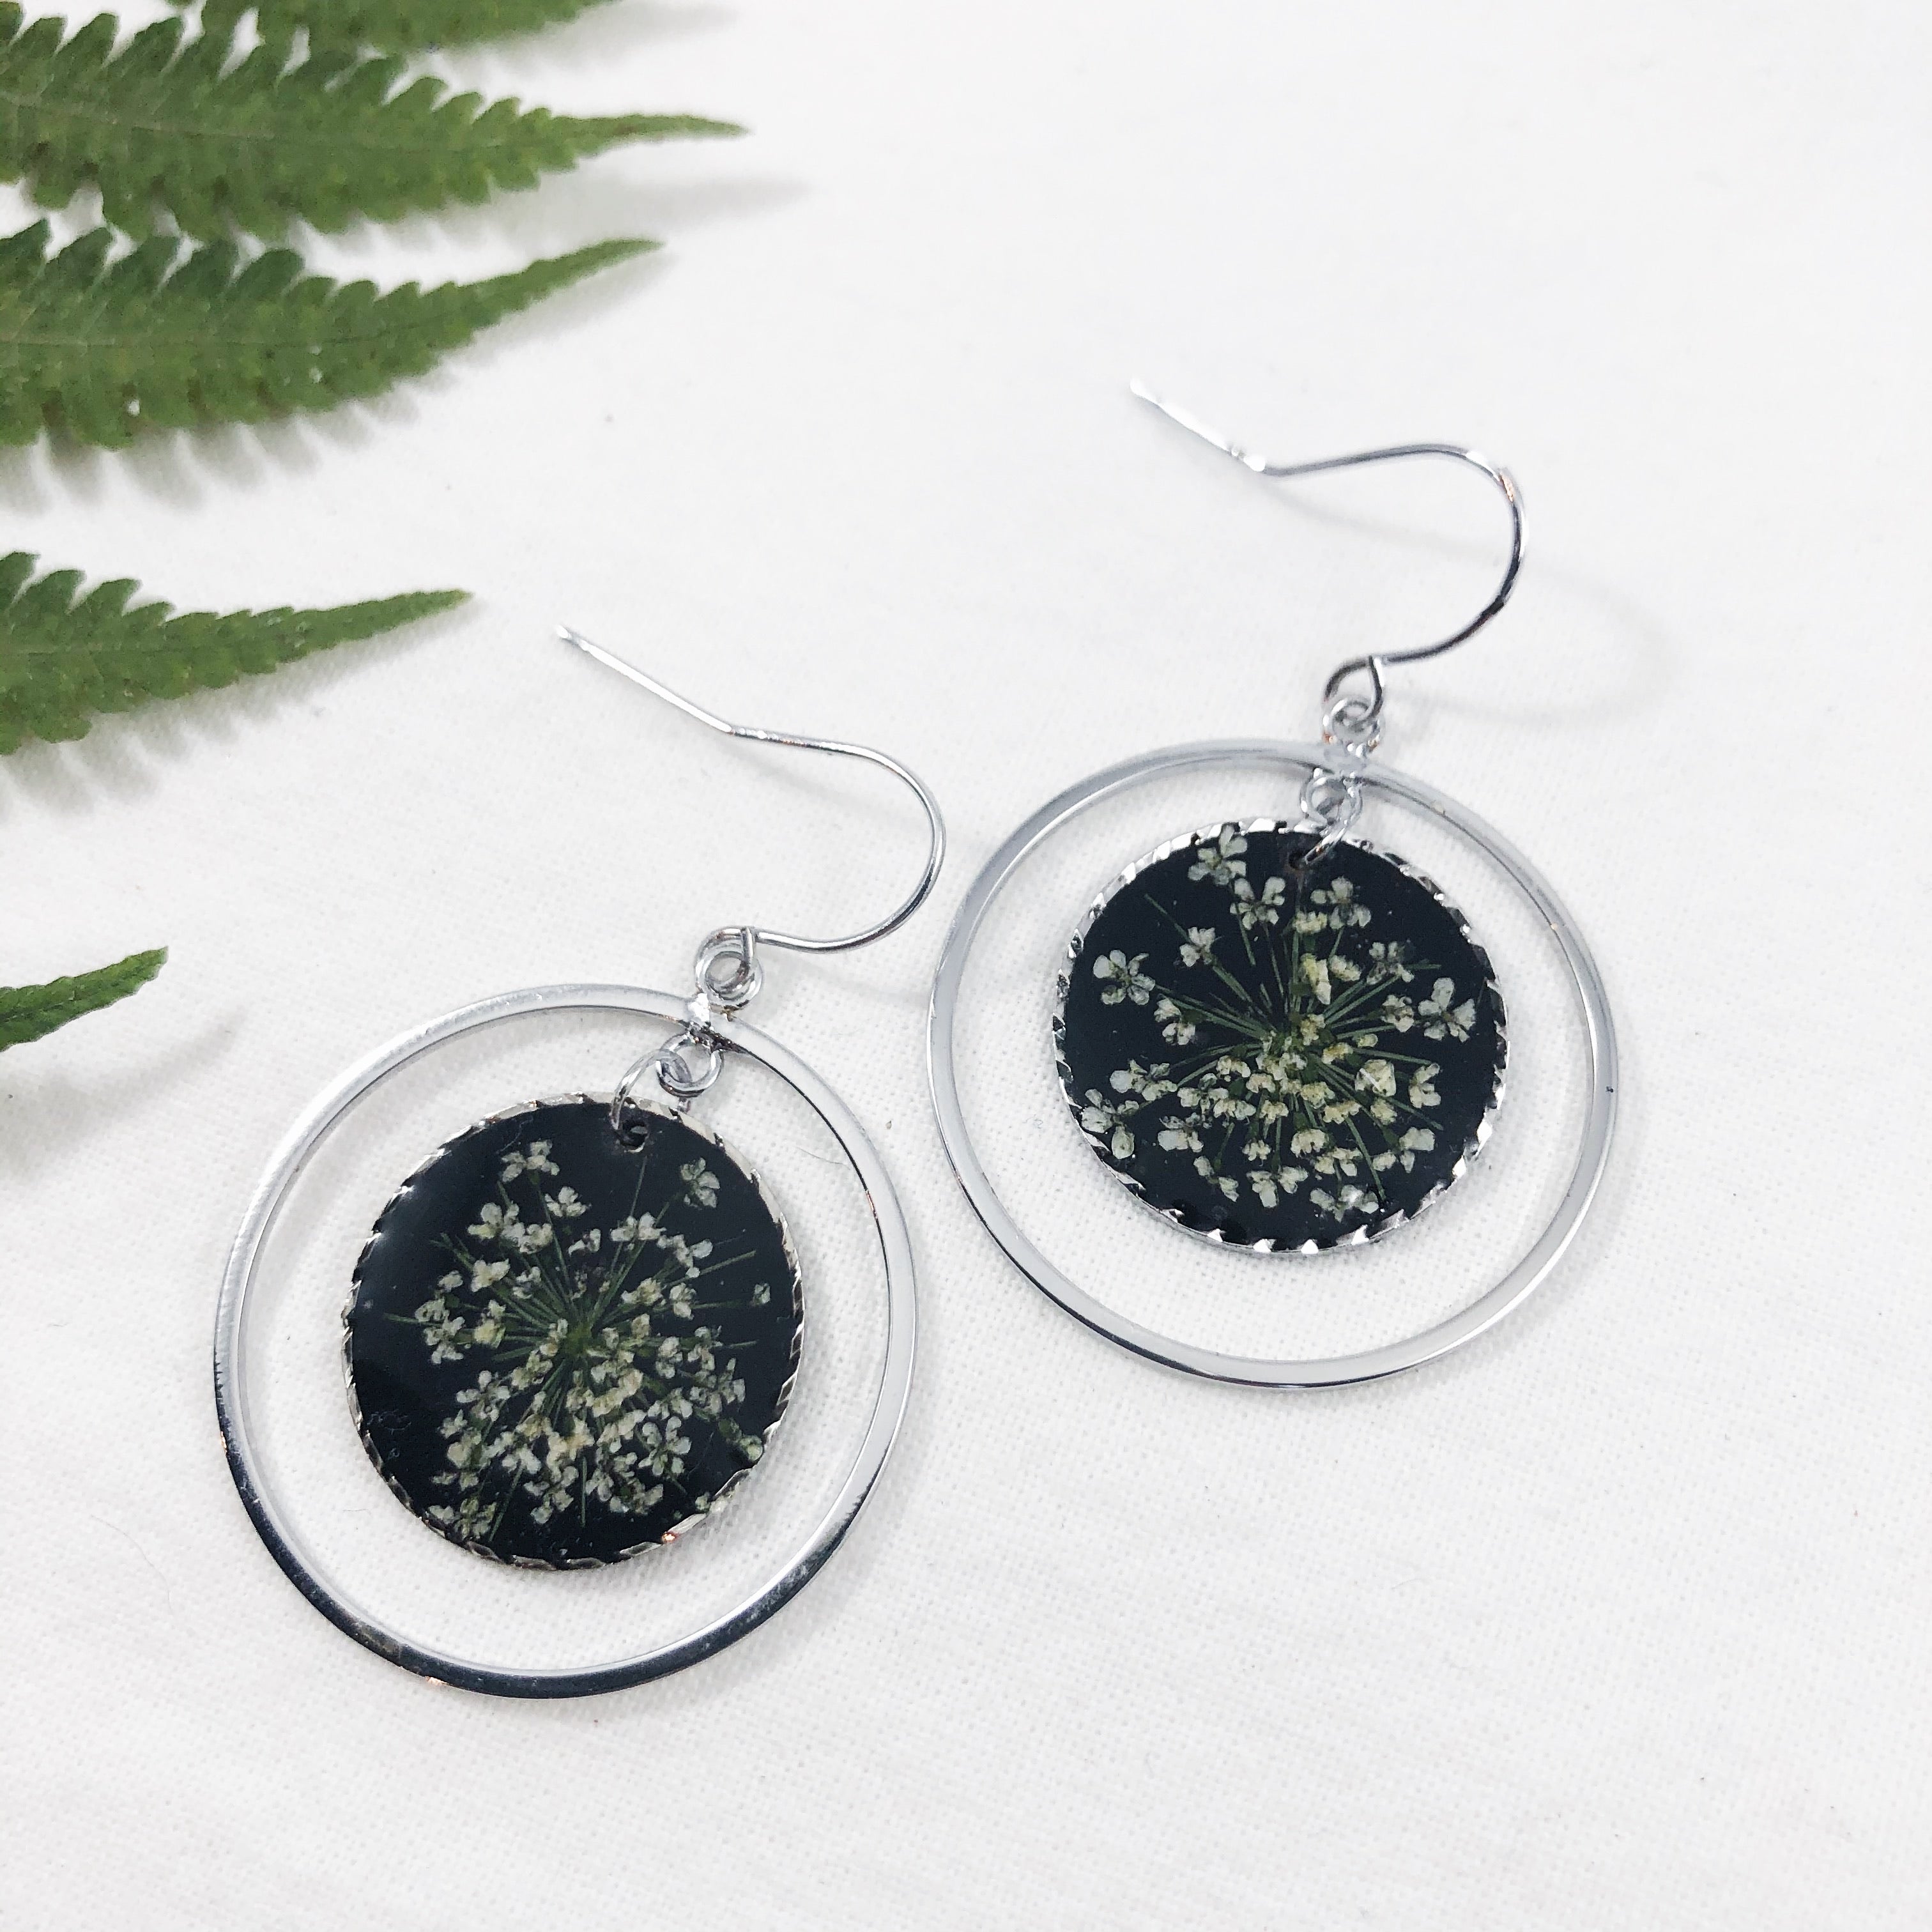 Queen Anne - Silver & Black Round Classic Earrings with Pressed Flowers